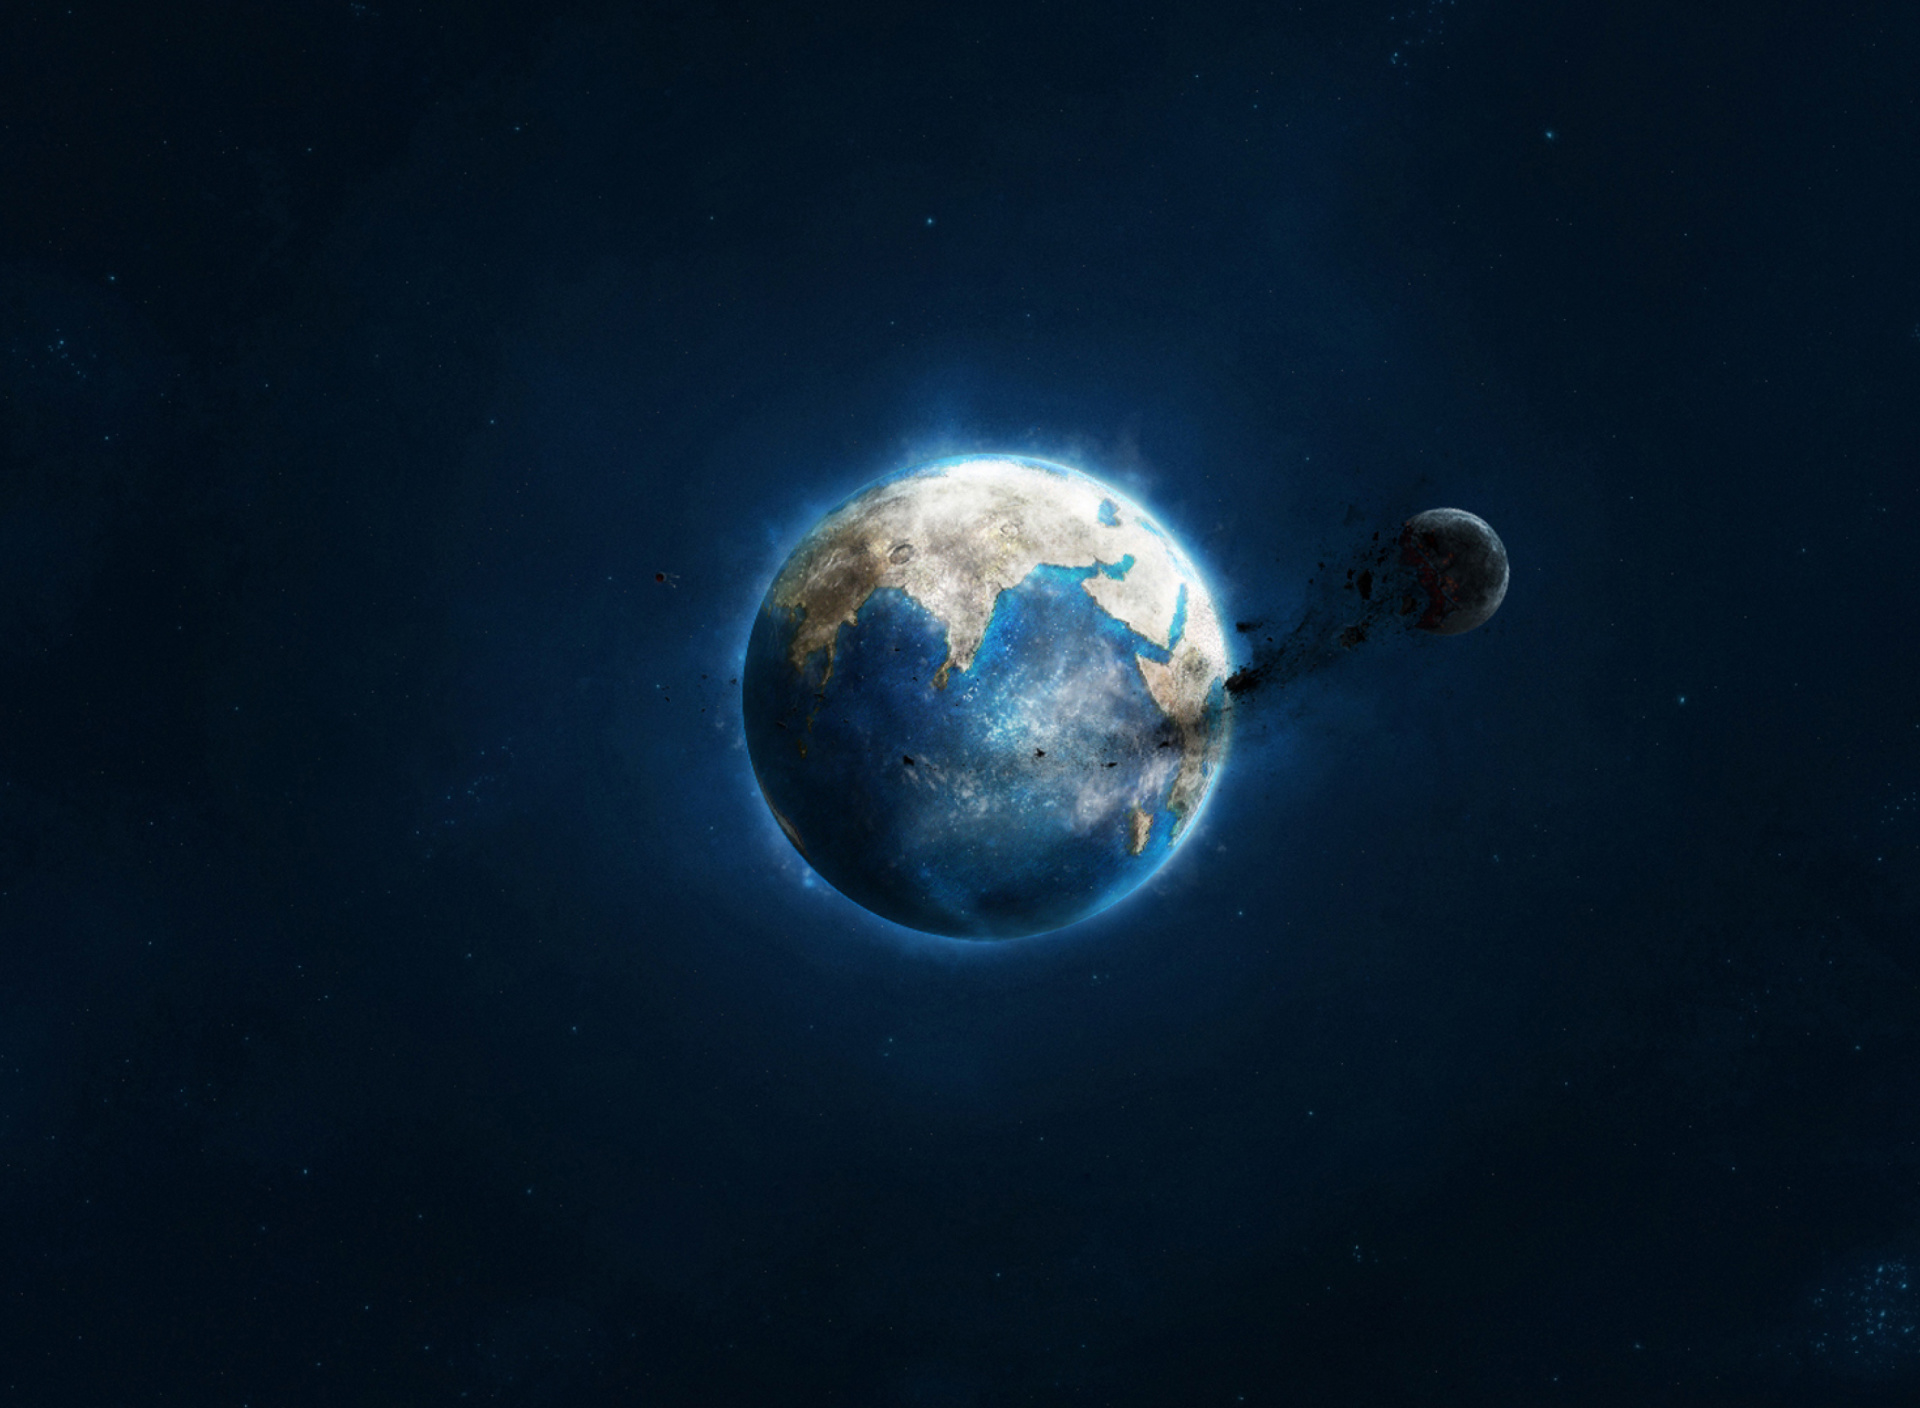 Das Planet and Asteroid Wallpaper 1920x1408